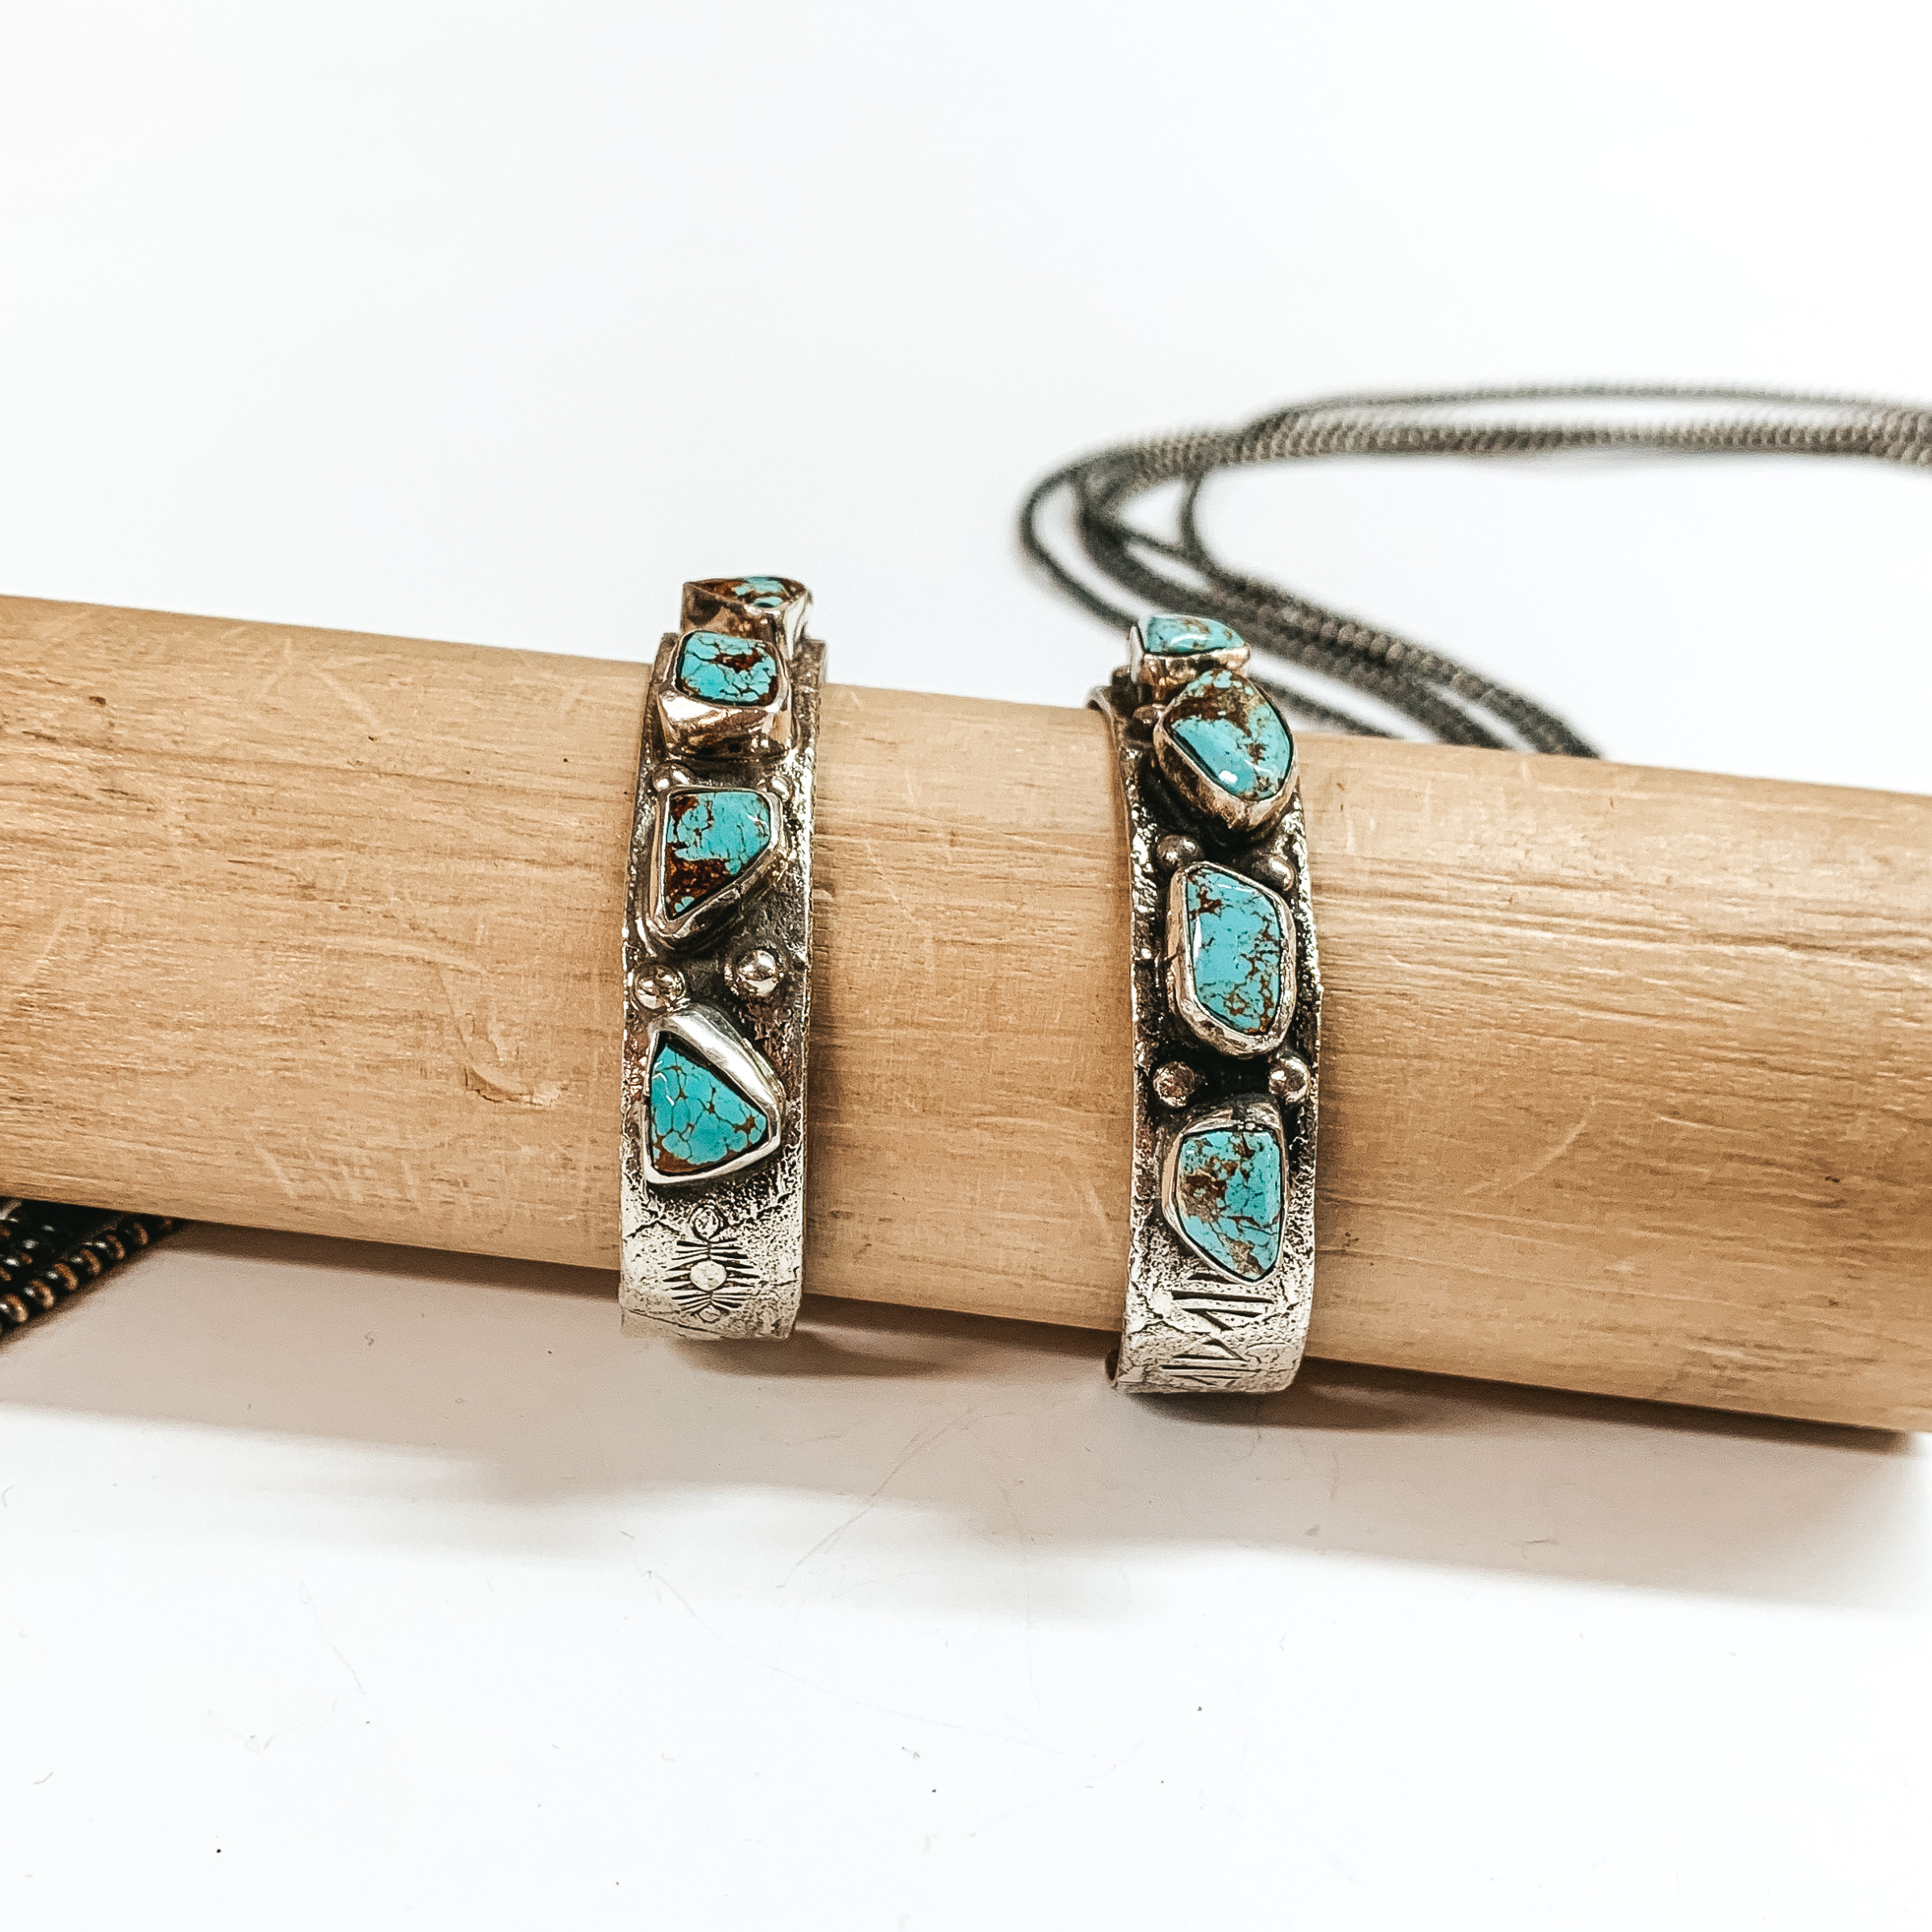 Jude Candelaria | Navajo Handmade Sterling Silver Cuff with Five Irregular Shaped Turquoise Stones - Giddy Up Glamour Boutique